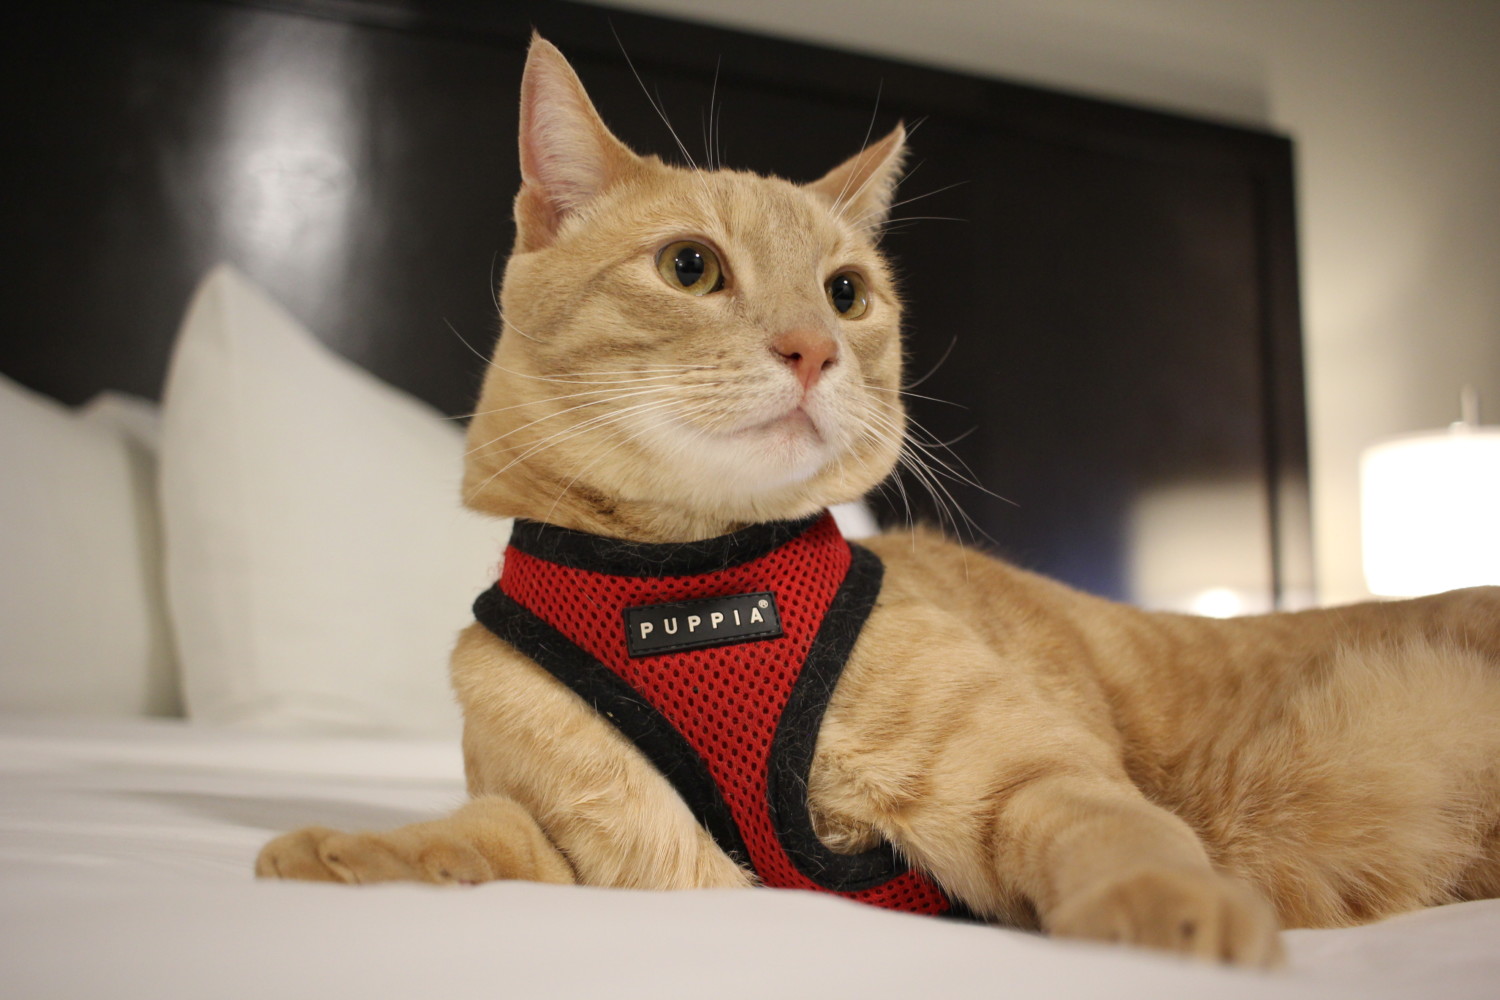 Fish the orange cat in a harness lays on a bed in a hotel room